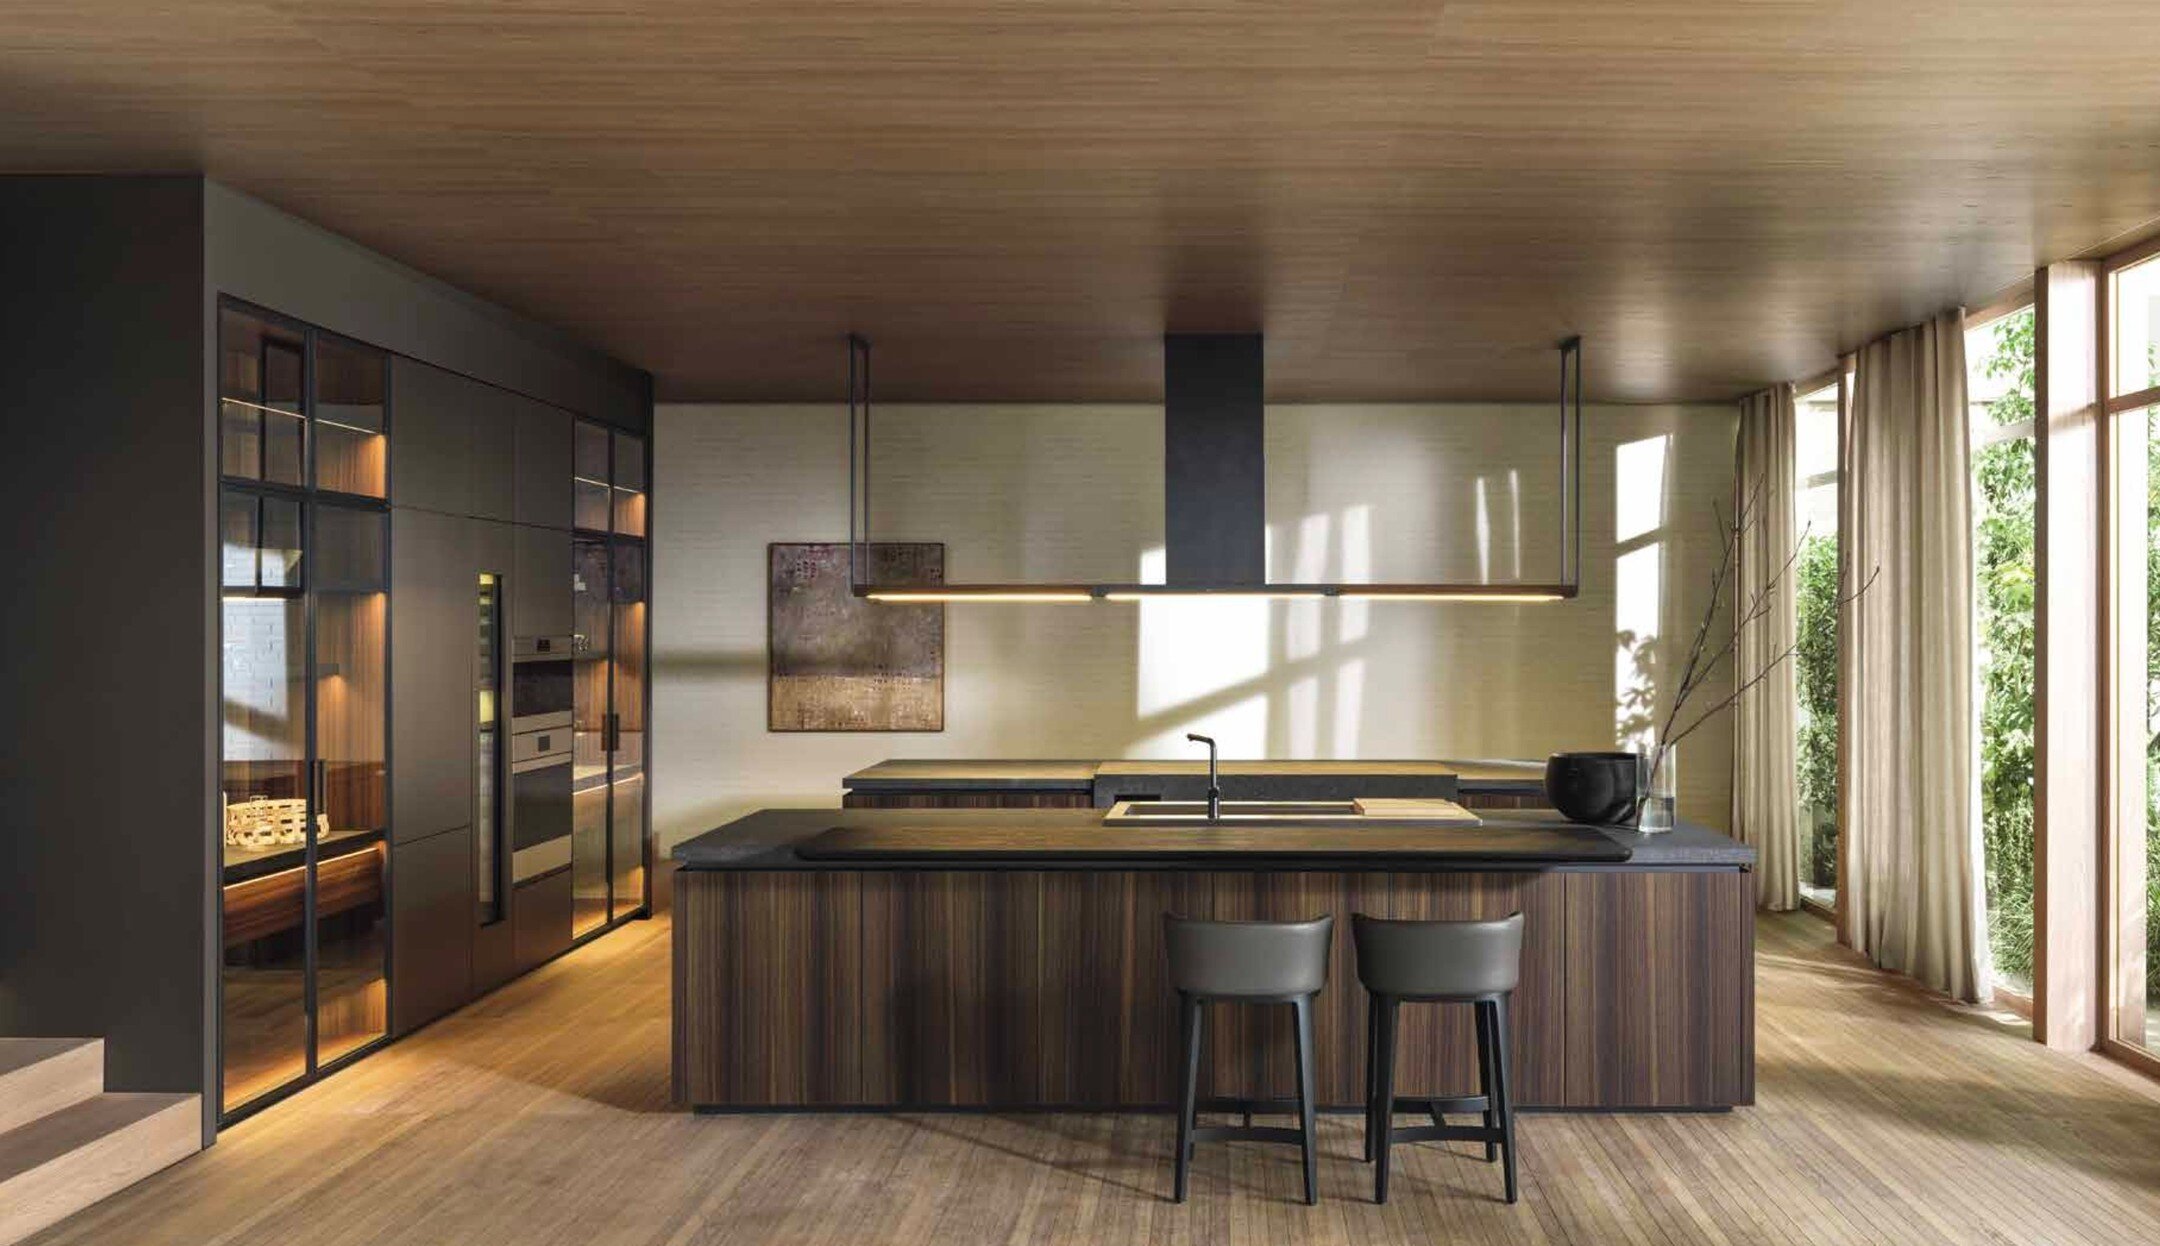 &quot;Wood is universally beautiful to man. It is the most humanly intimate of materials.&quot; - Frank Loyd Wright

Explore more of our exclusive European collections including @molteniandc 
https://www.vecchiohome.com